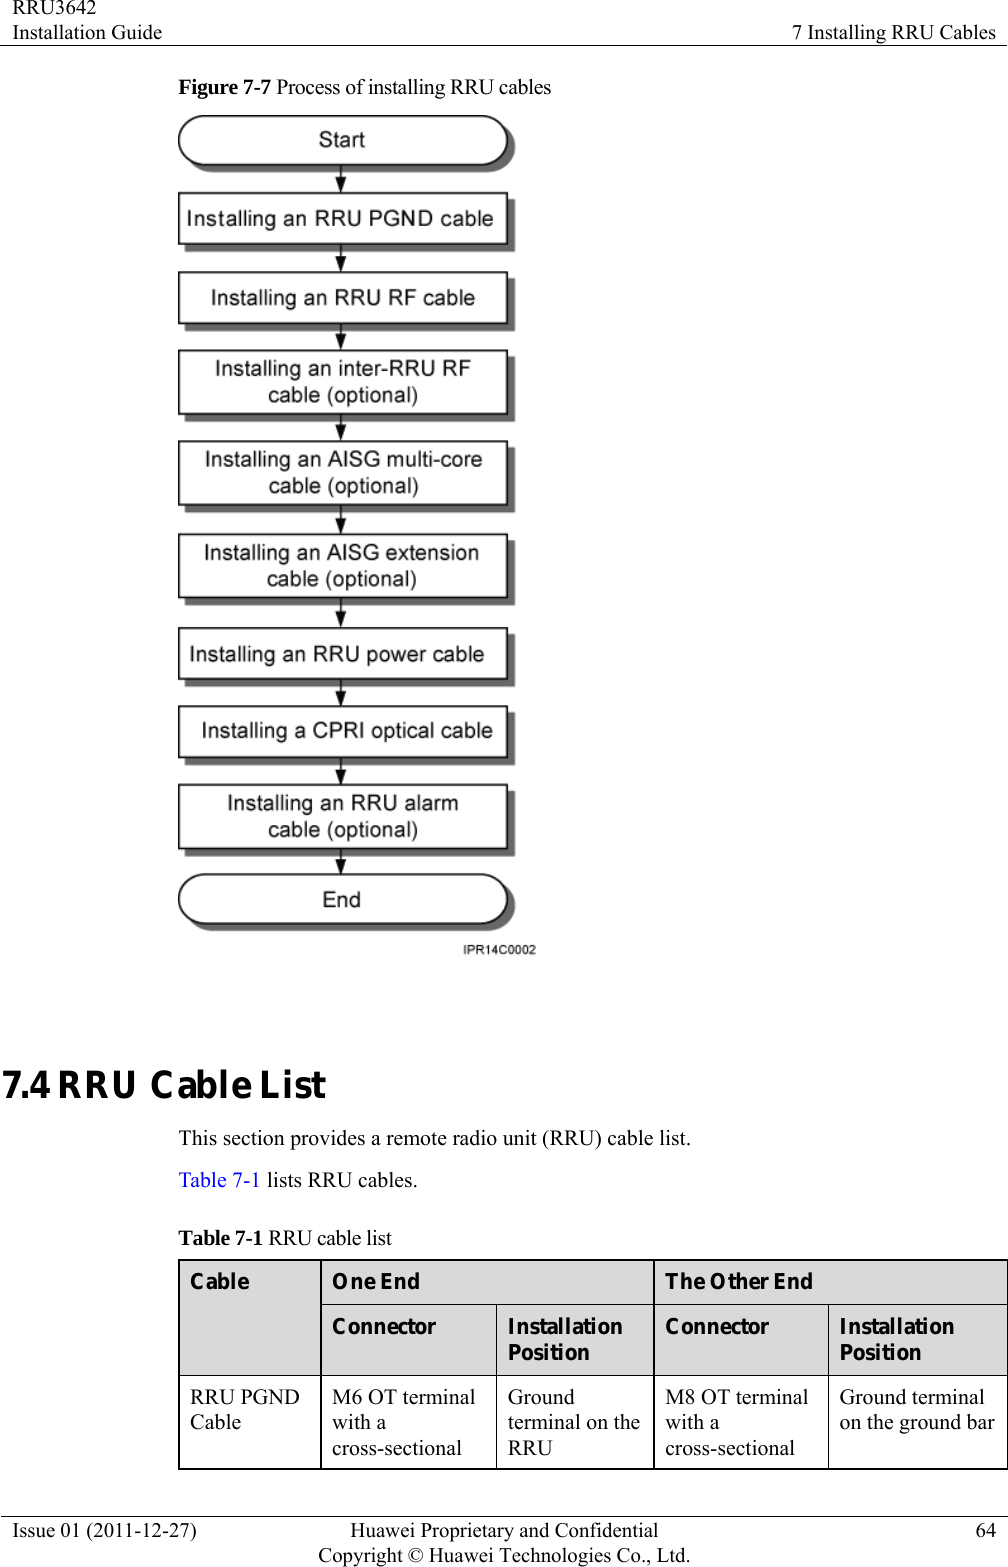 RRU3642 Installation Guide  7 Installing RRU Cables Issue 01 (2011-12-27)  Huawei Proprietary and Confidential         Copyright © Huawei Technologies Co., Ltd.64 Figure 7-7 Process of installing RRU cables   7.4 RRU Cable List This section provides a remote radio unit (RRU) cable list. Table 7-1 lists RRU cables. Table 7-1 RRU cable list Cable  One End  The Other End Connector  Installation Position  Connector  Installation Position RRU PGND Cable M6 OT terminal with a cross-sectional Ground terminal on the RRU M8 OT terminal with a cross-sectional Ground terminal on the ground bar